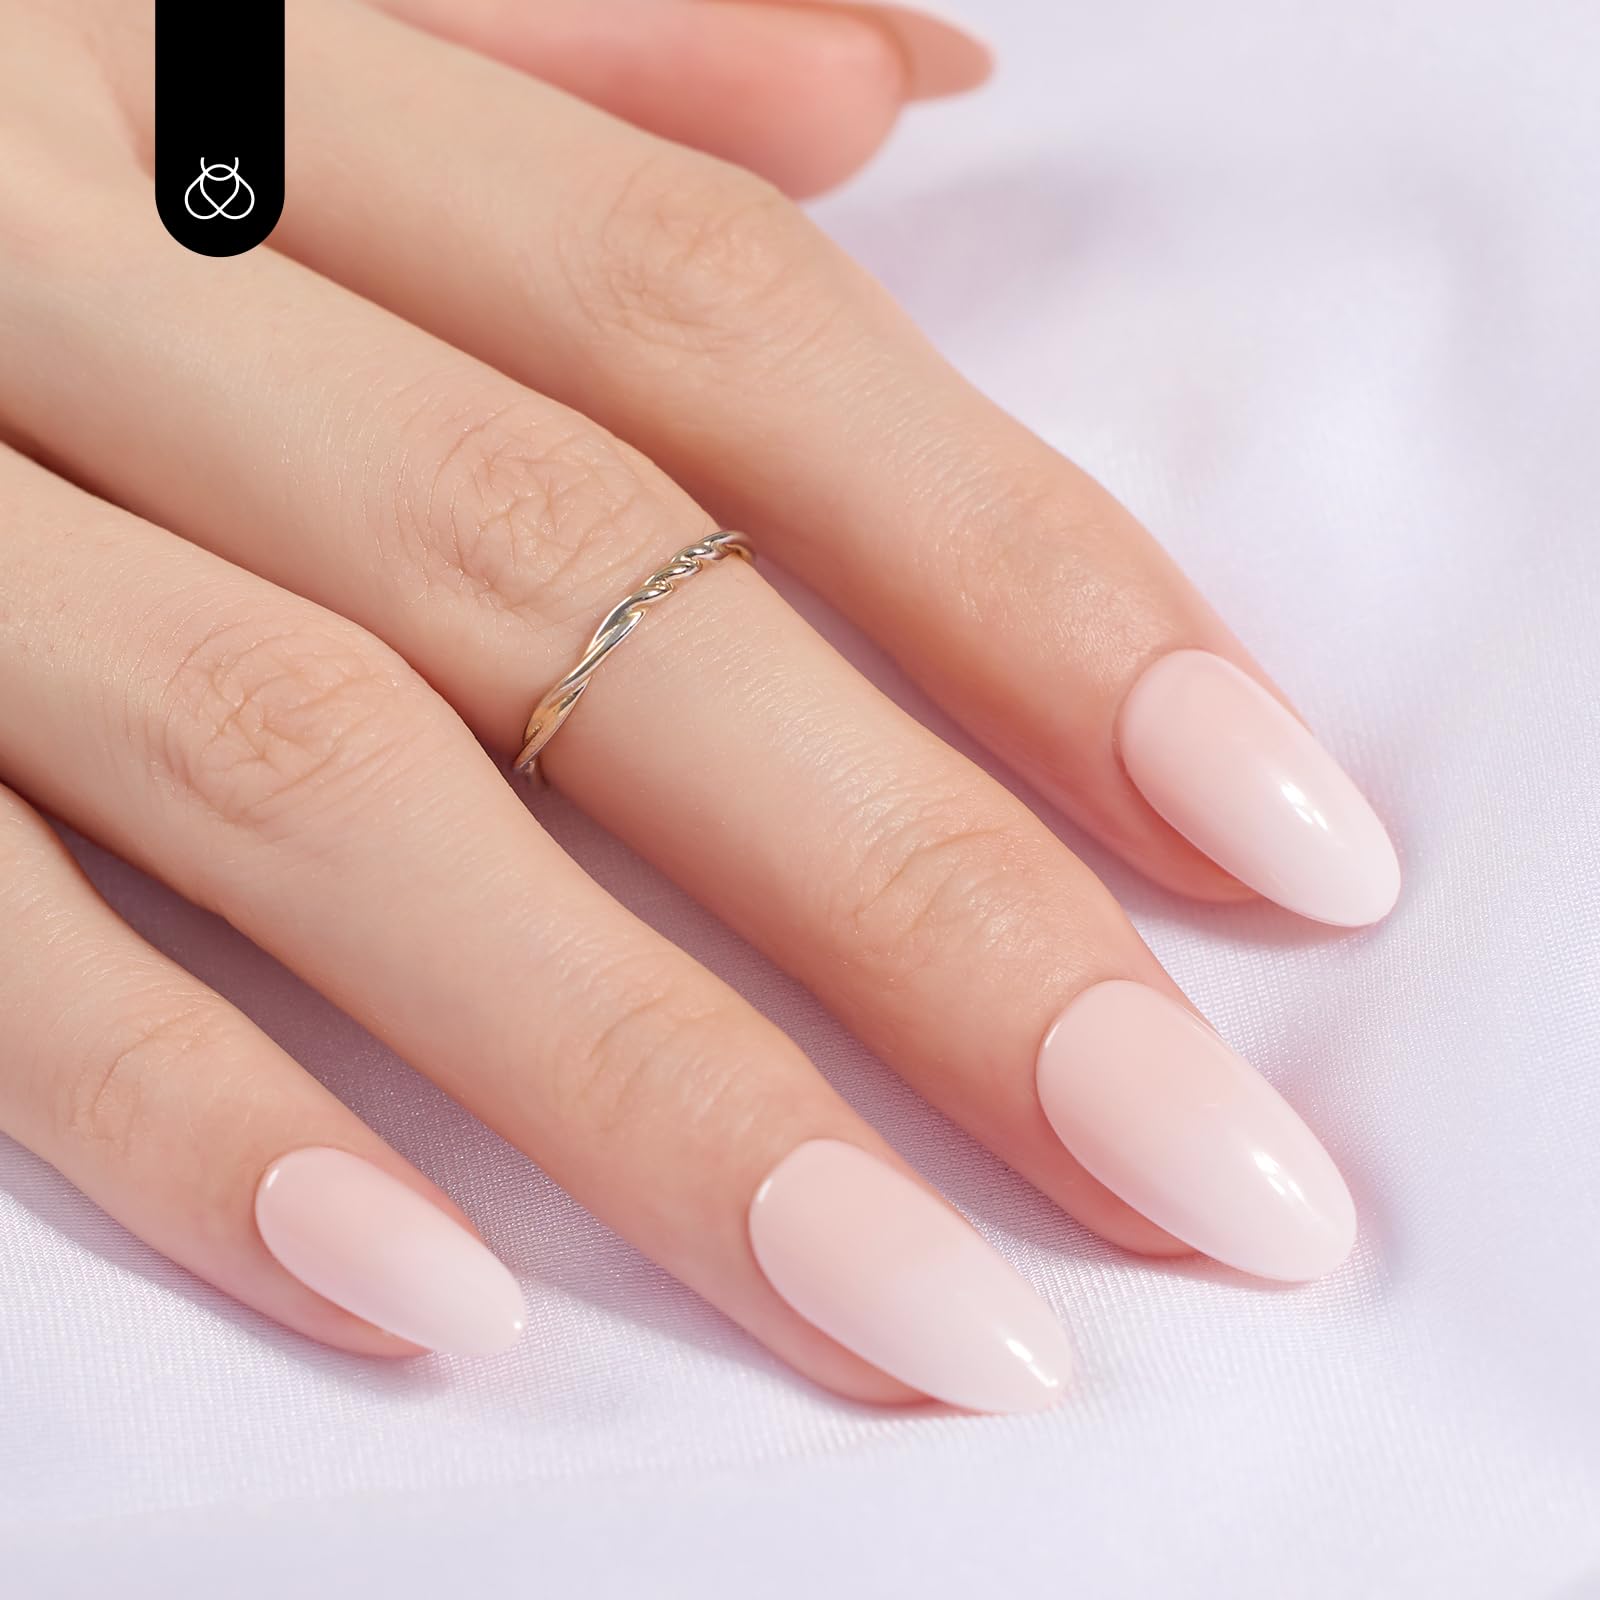 Muse in White | Medium Oval Press On Nails 14 Sizes-28 Pcs